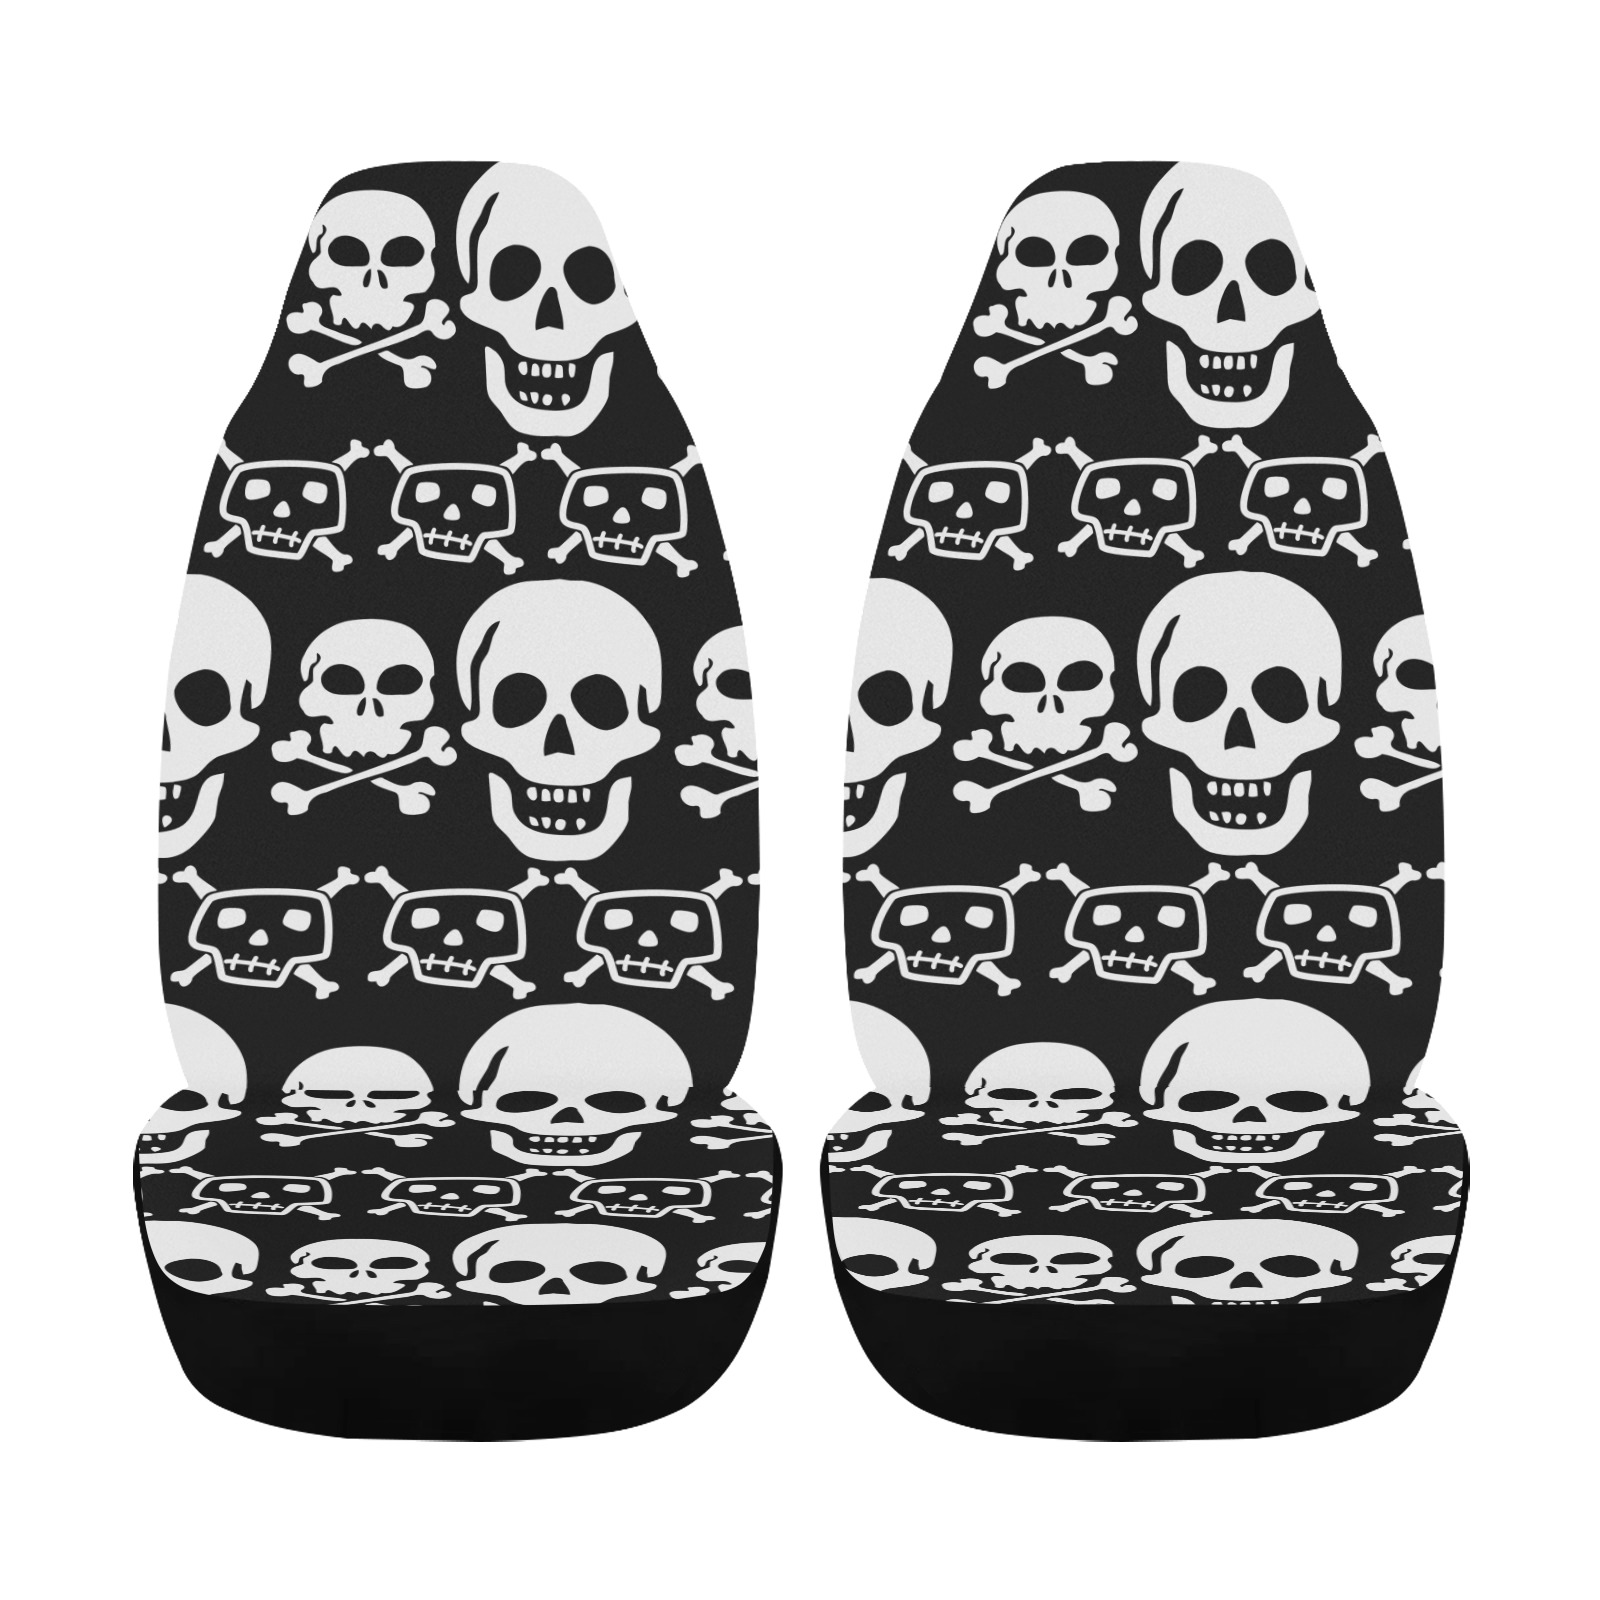 Skulls Car Seat Covers Car Seat Cover Airbag Compatible (Set of 2)